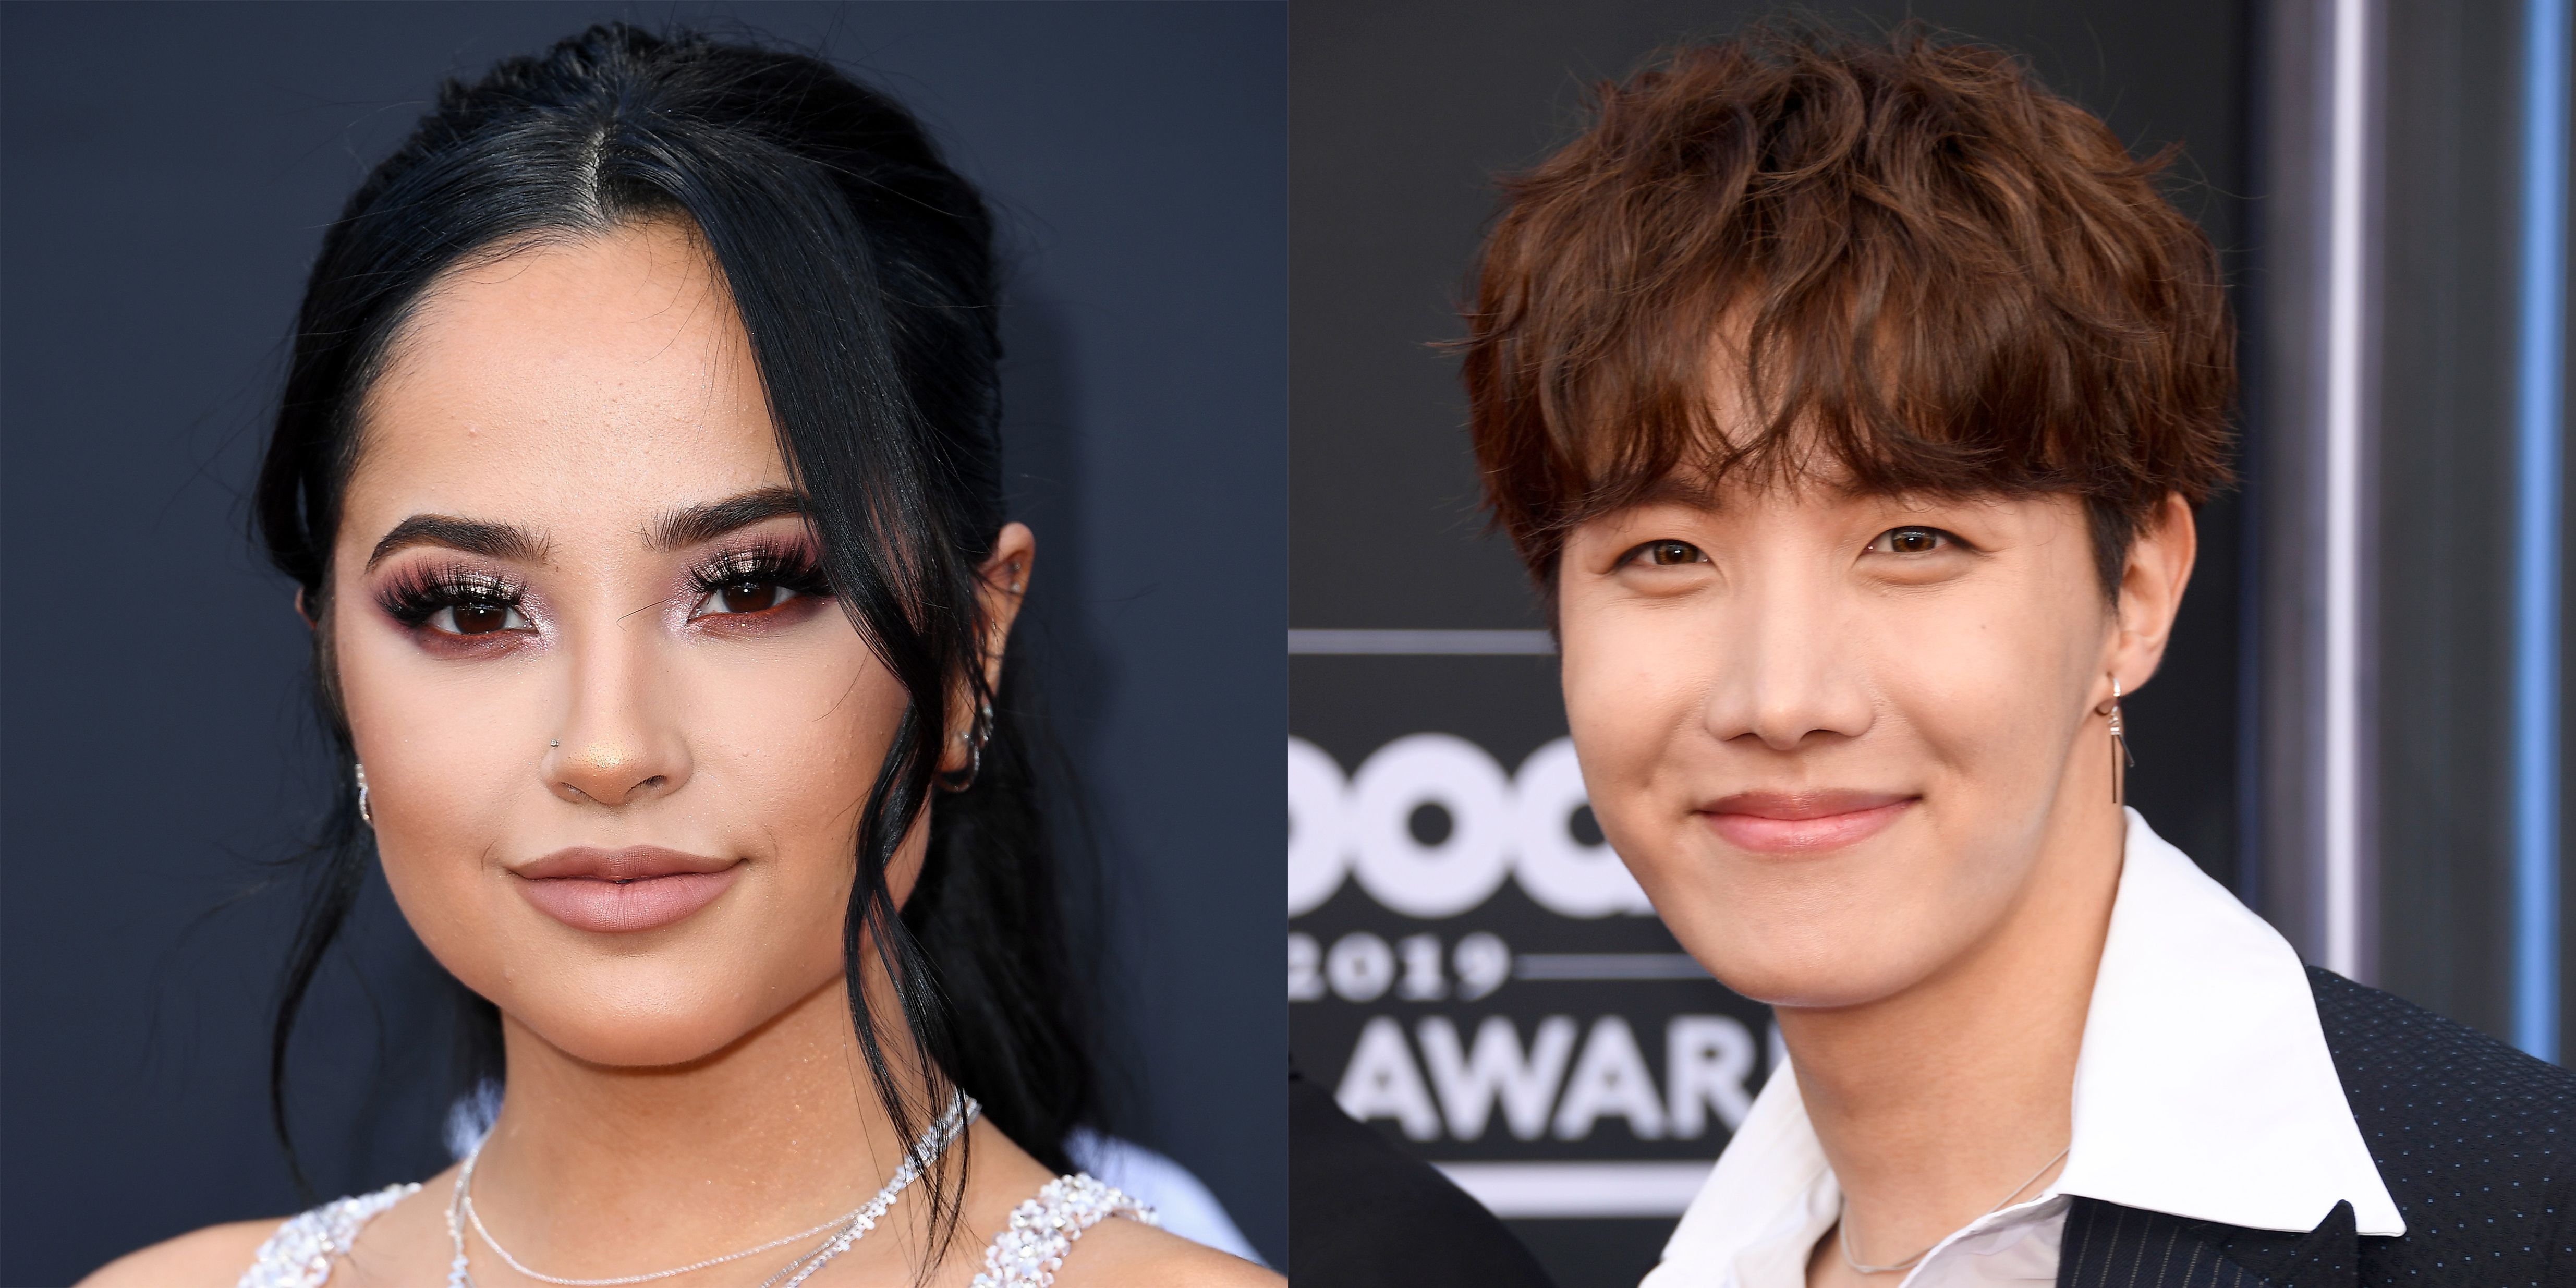 Jhope And Becky G Song : Bts J Hope And Singer Becky G Confirm